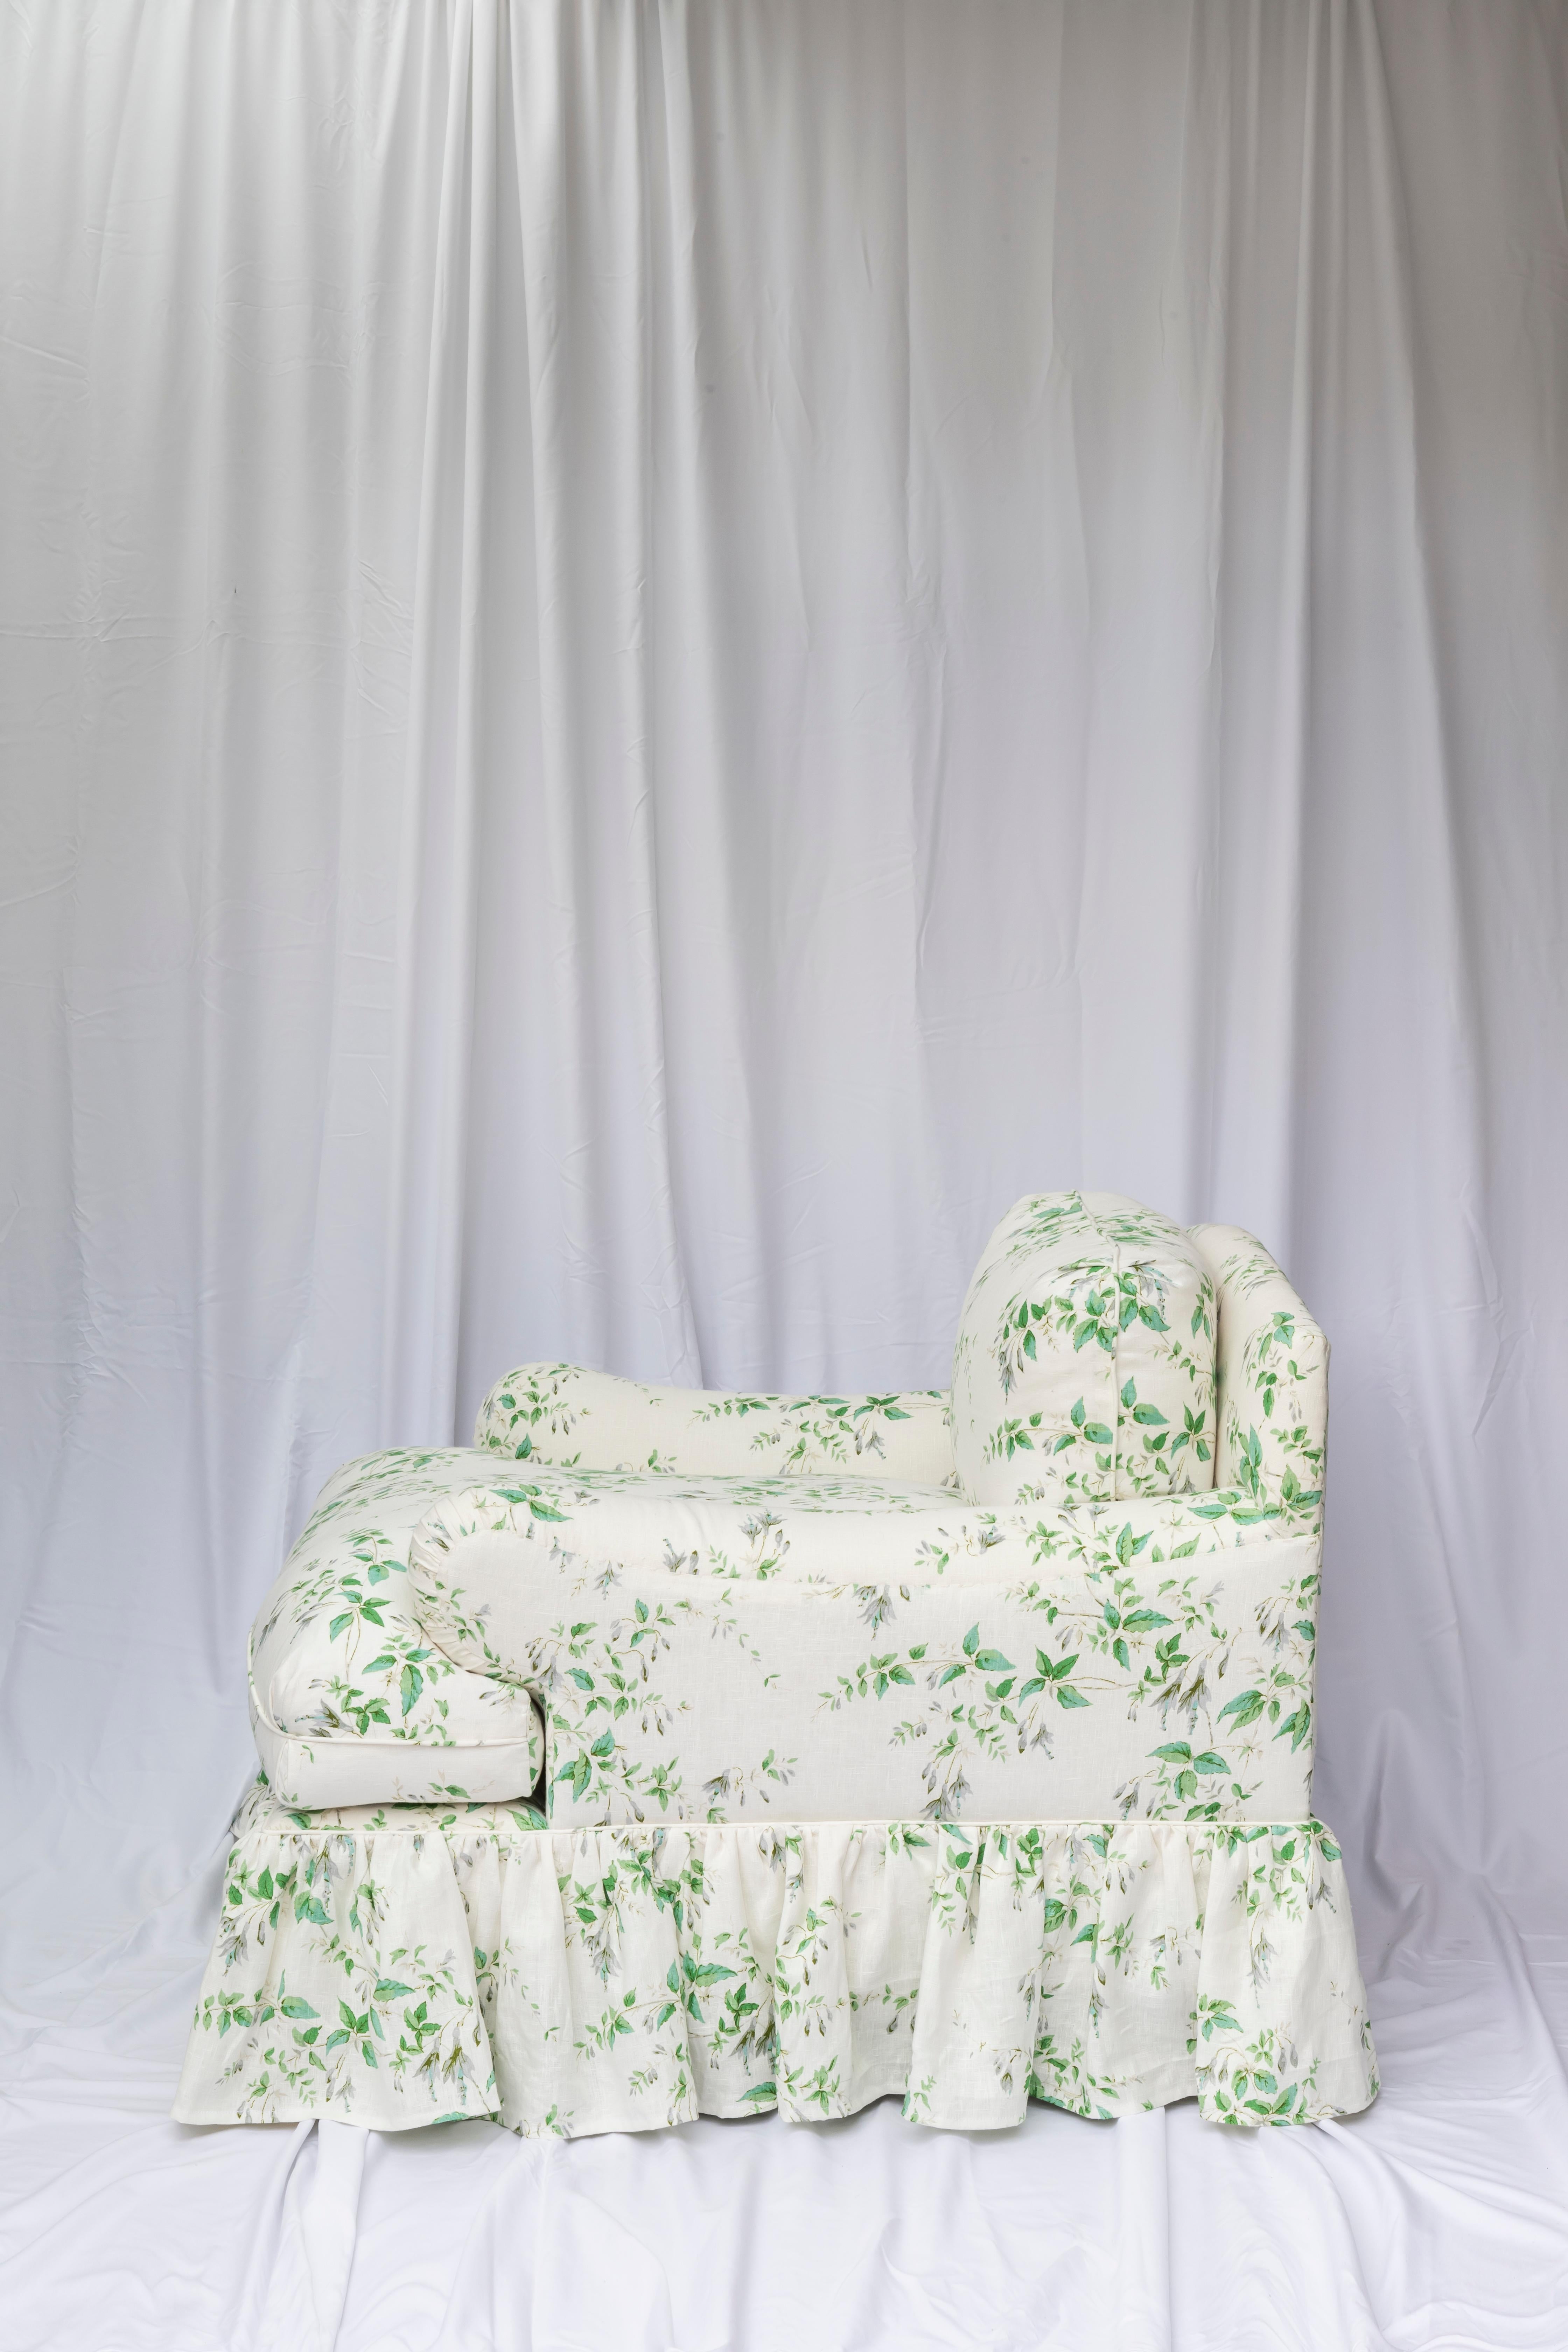 The Lucia armchair is a beauty – soft and pretty inside and out, she most definitely takes centre stage. She’s a girly joyful thing, a sort of chubby take on the traditional Howard. The scale is both bold and neat; with ample curves, English arms